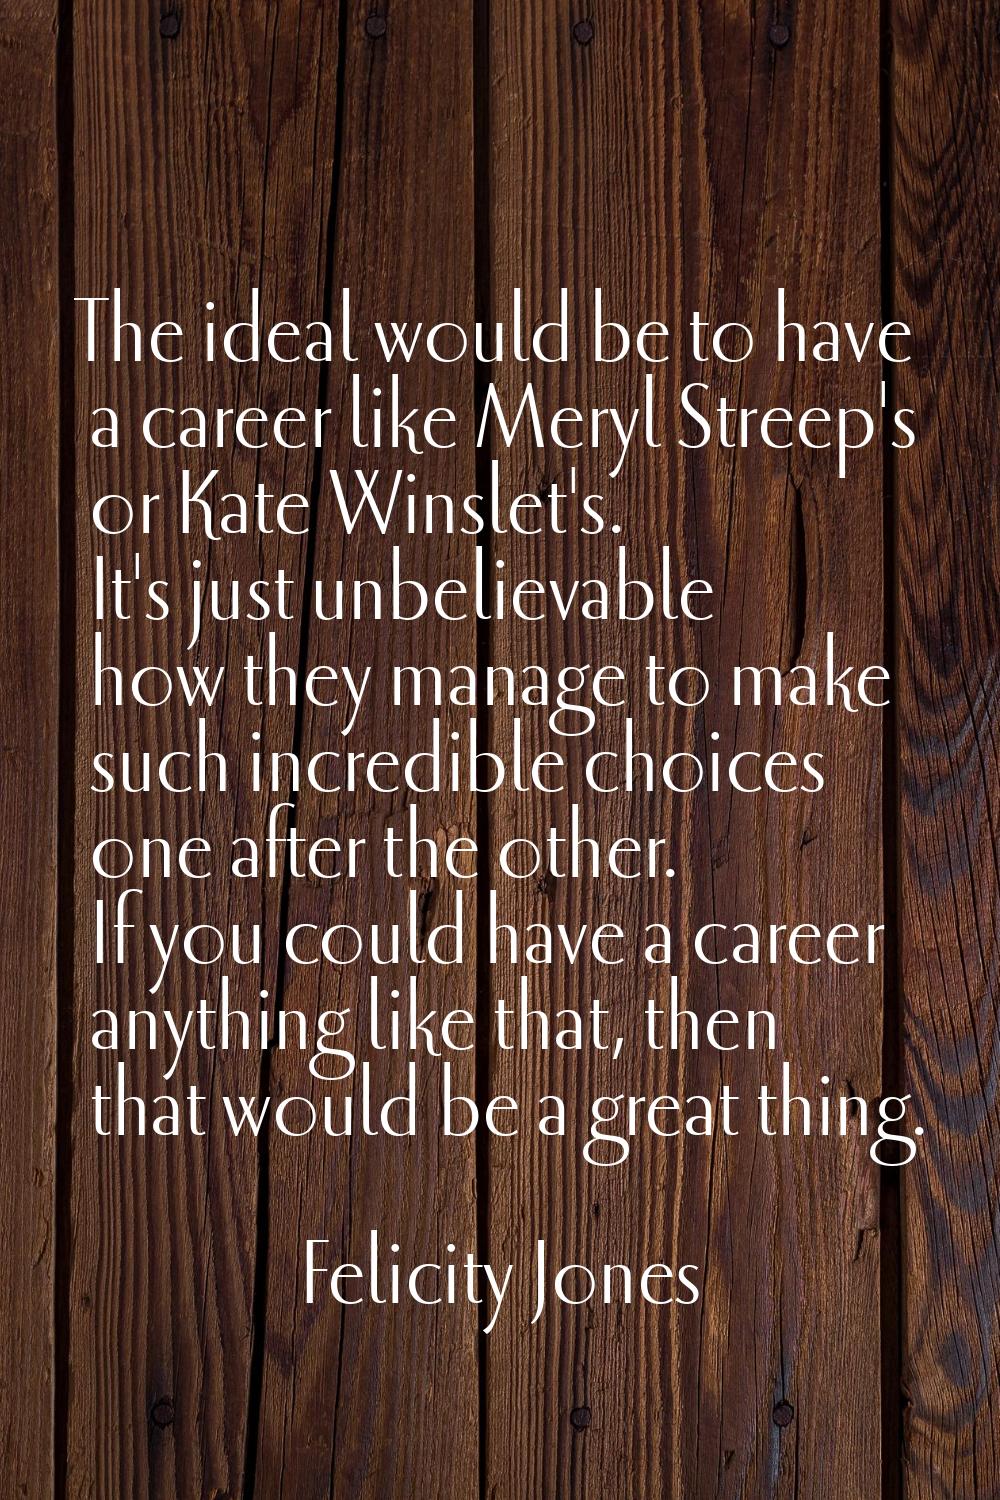 The ideal would be to have a career like Meryl Streep's or Kate Winslet's. It's just unbelievable h